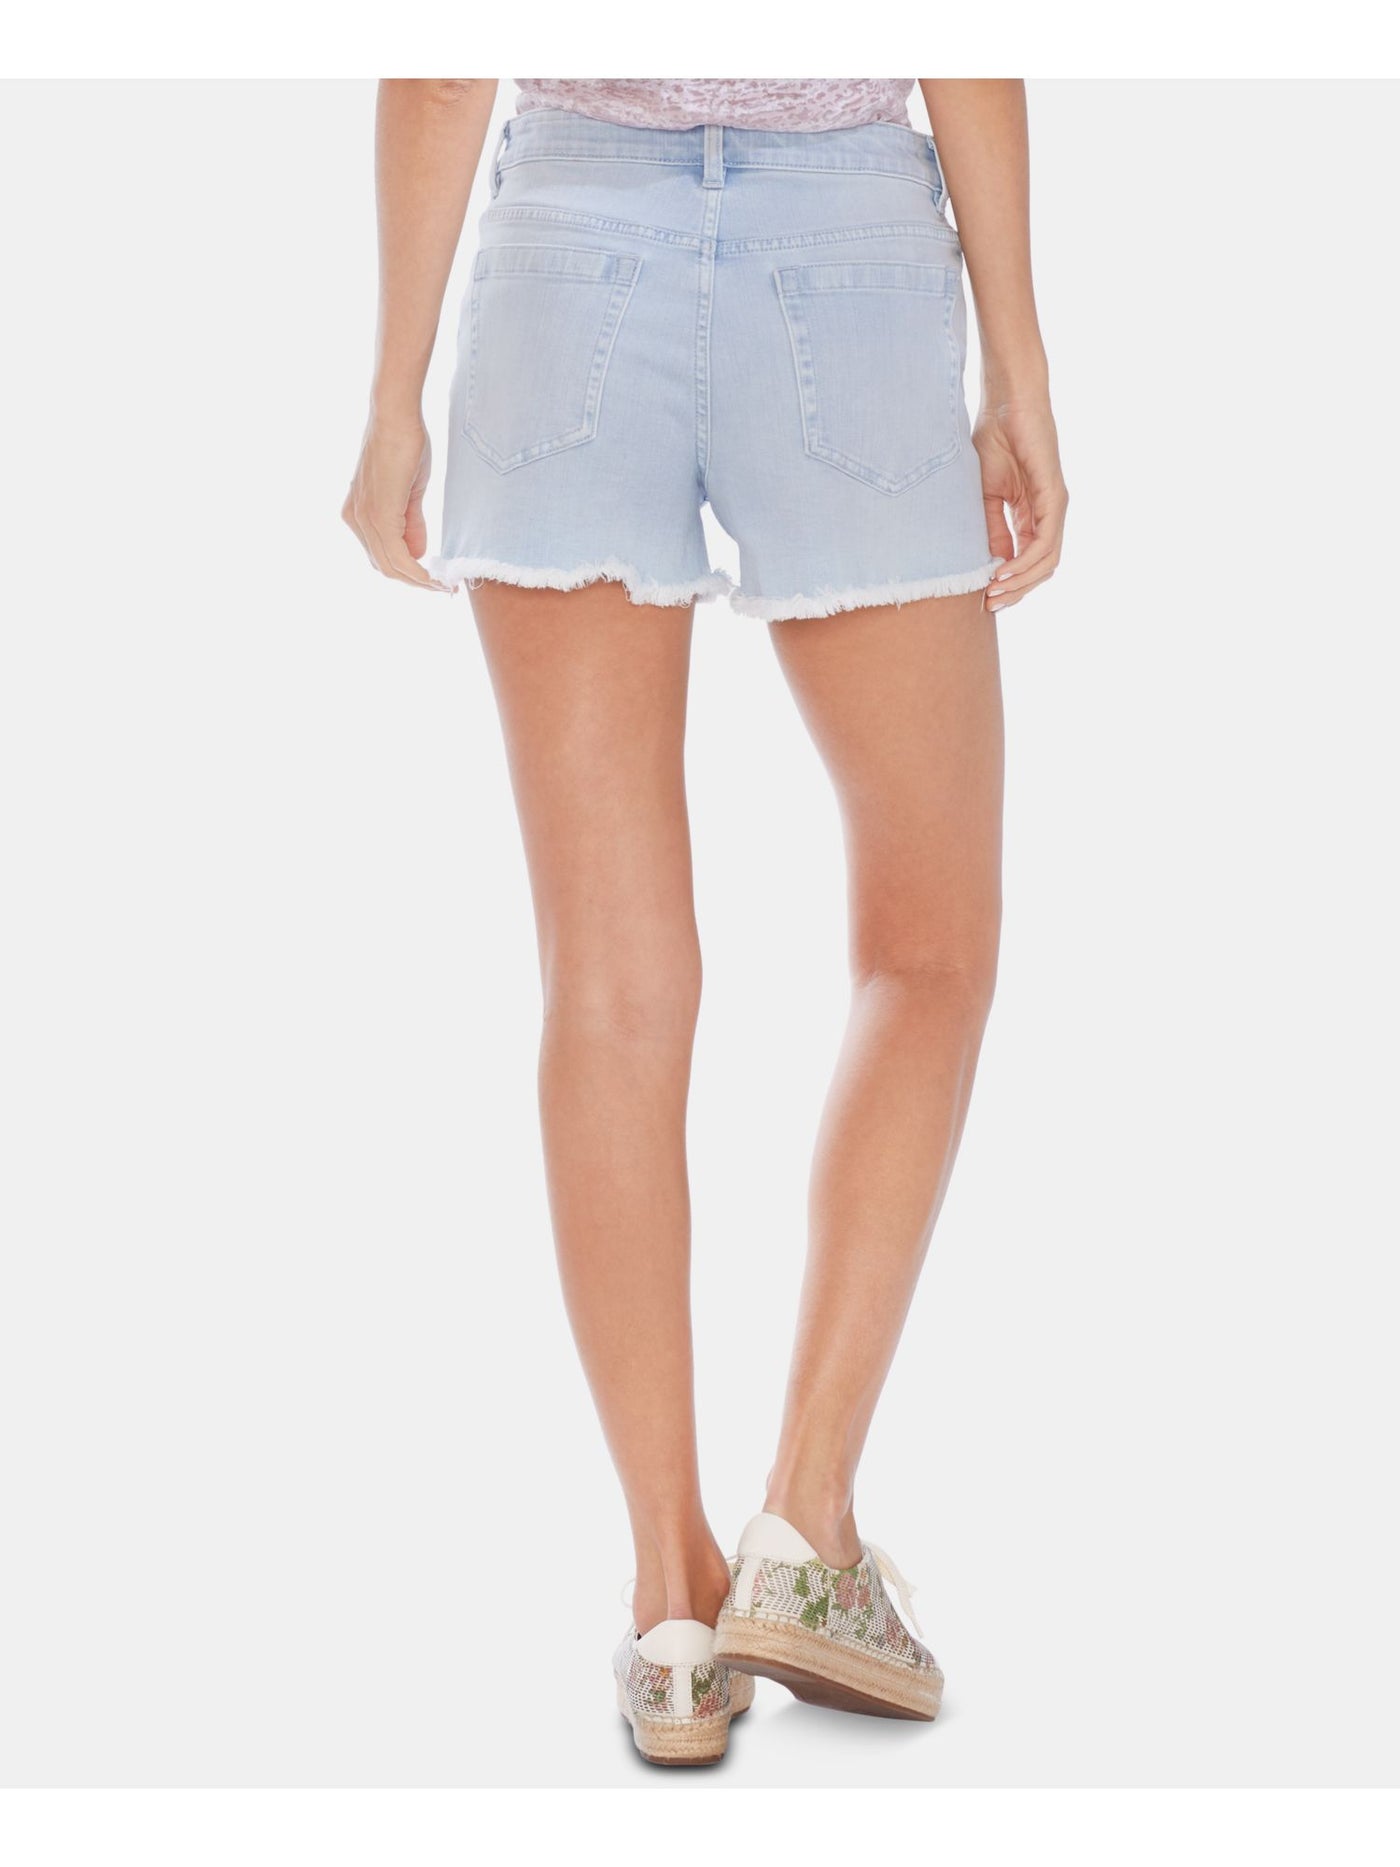 VINCE CAMUTO Womens Blue Frayed Pocketed High Waist Shorts 29\8